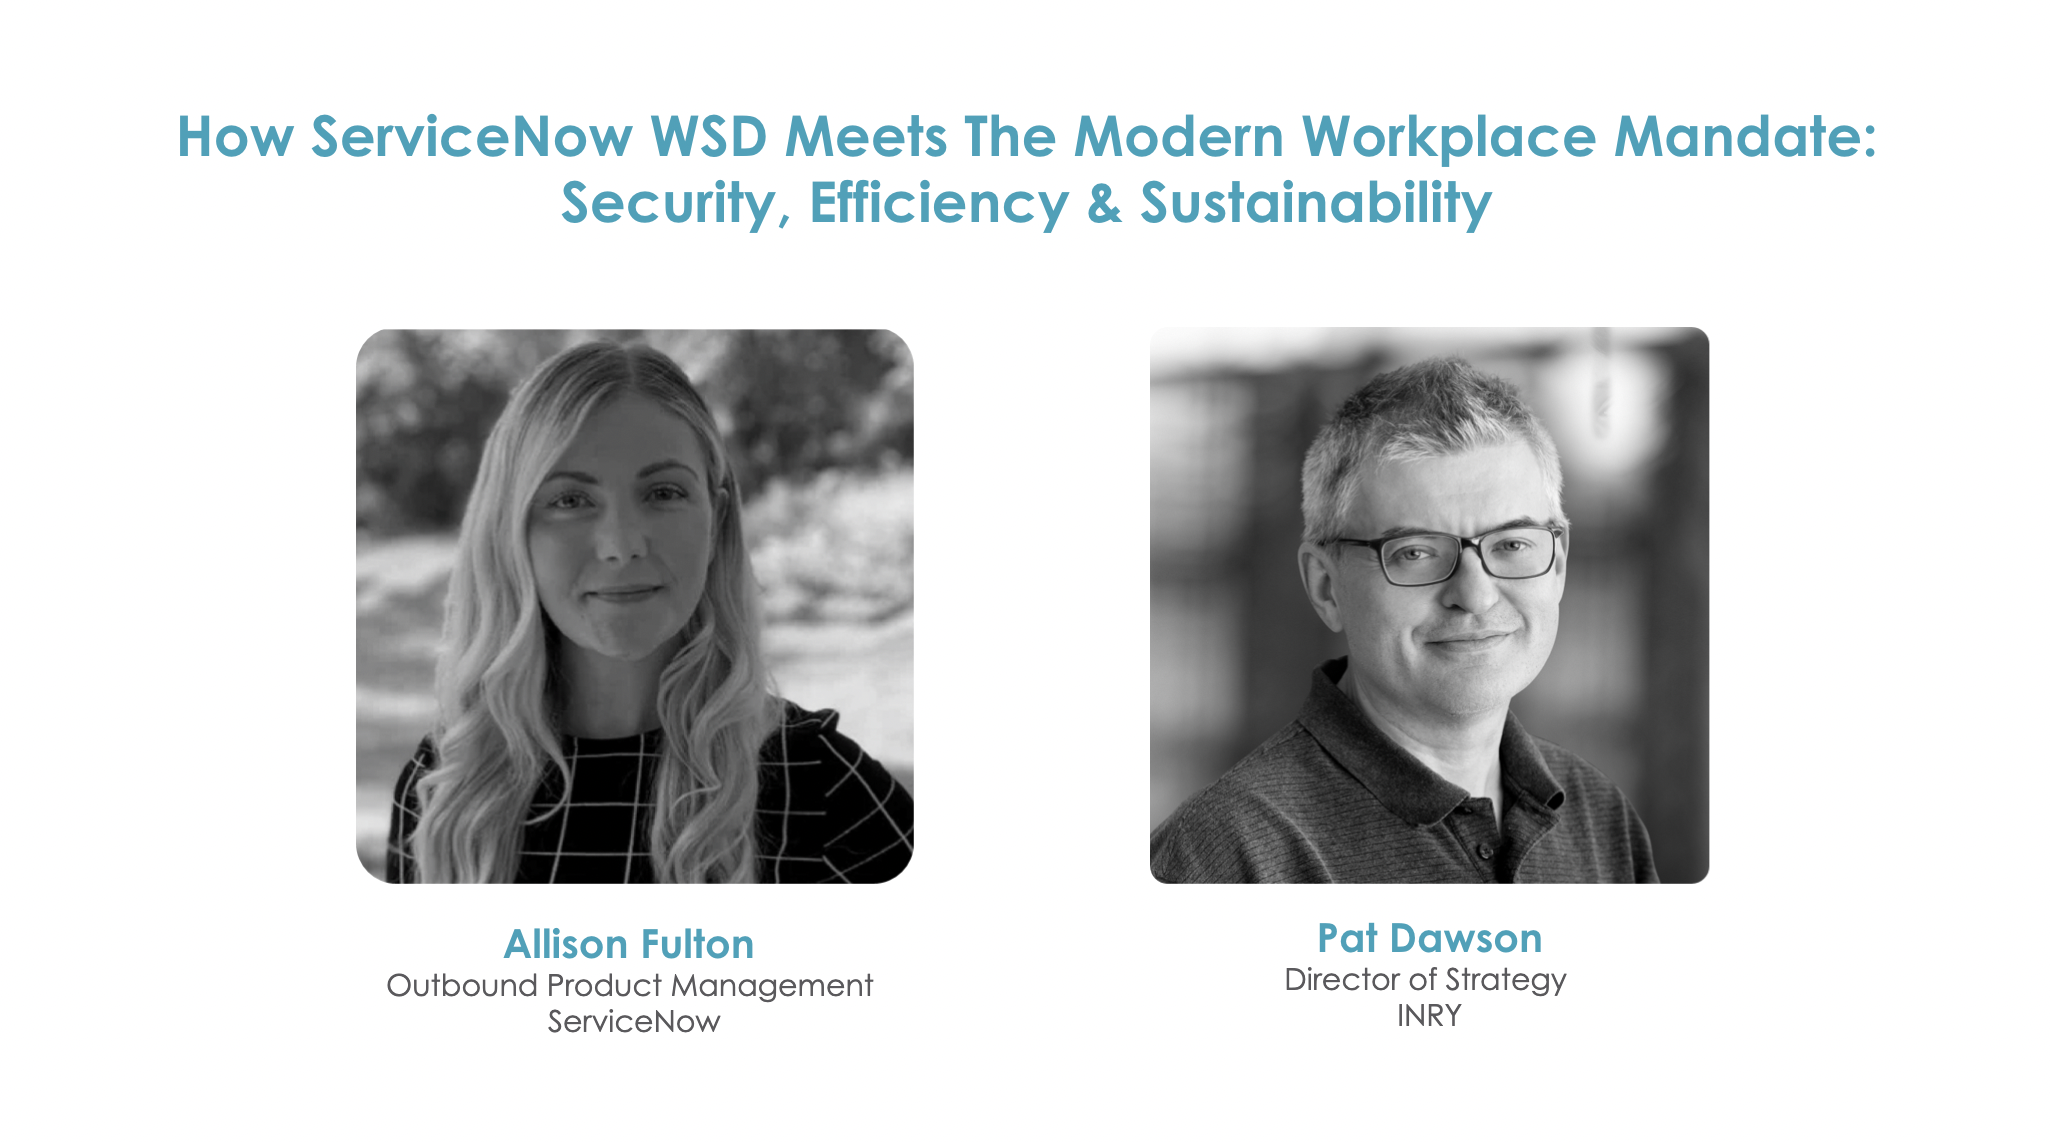 Webinar: Sustainable, Secure, and Efficient: The Modern Workplace Mandate